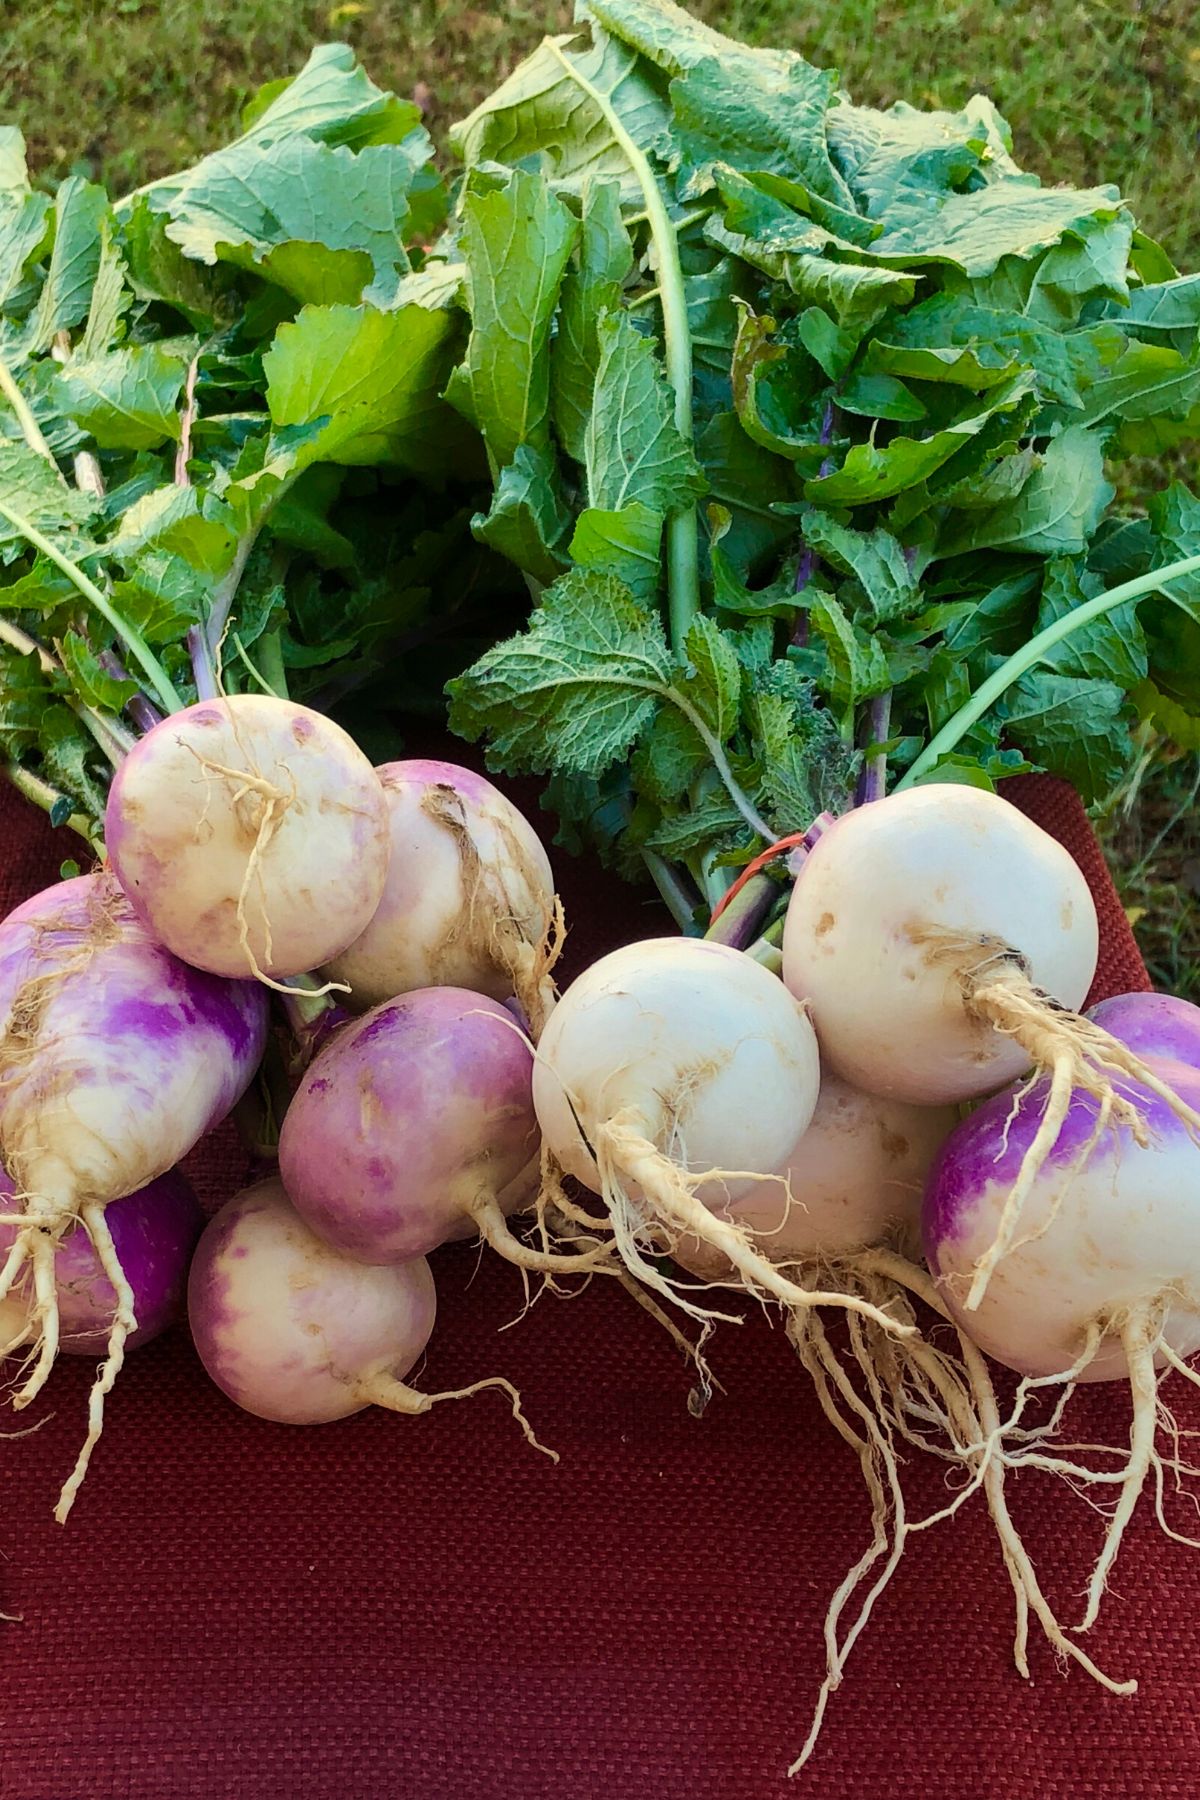 two bunches of turnips on a table.